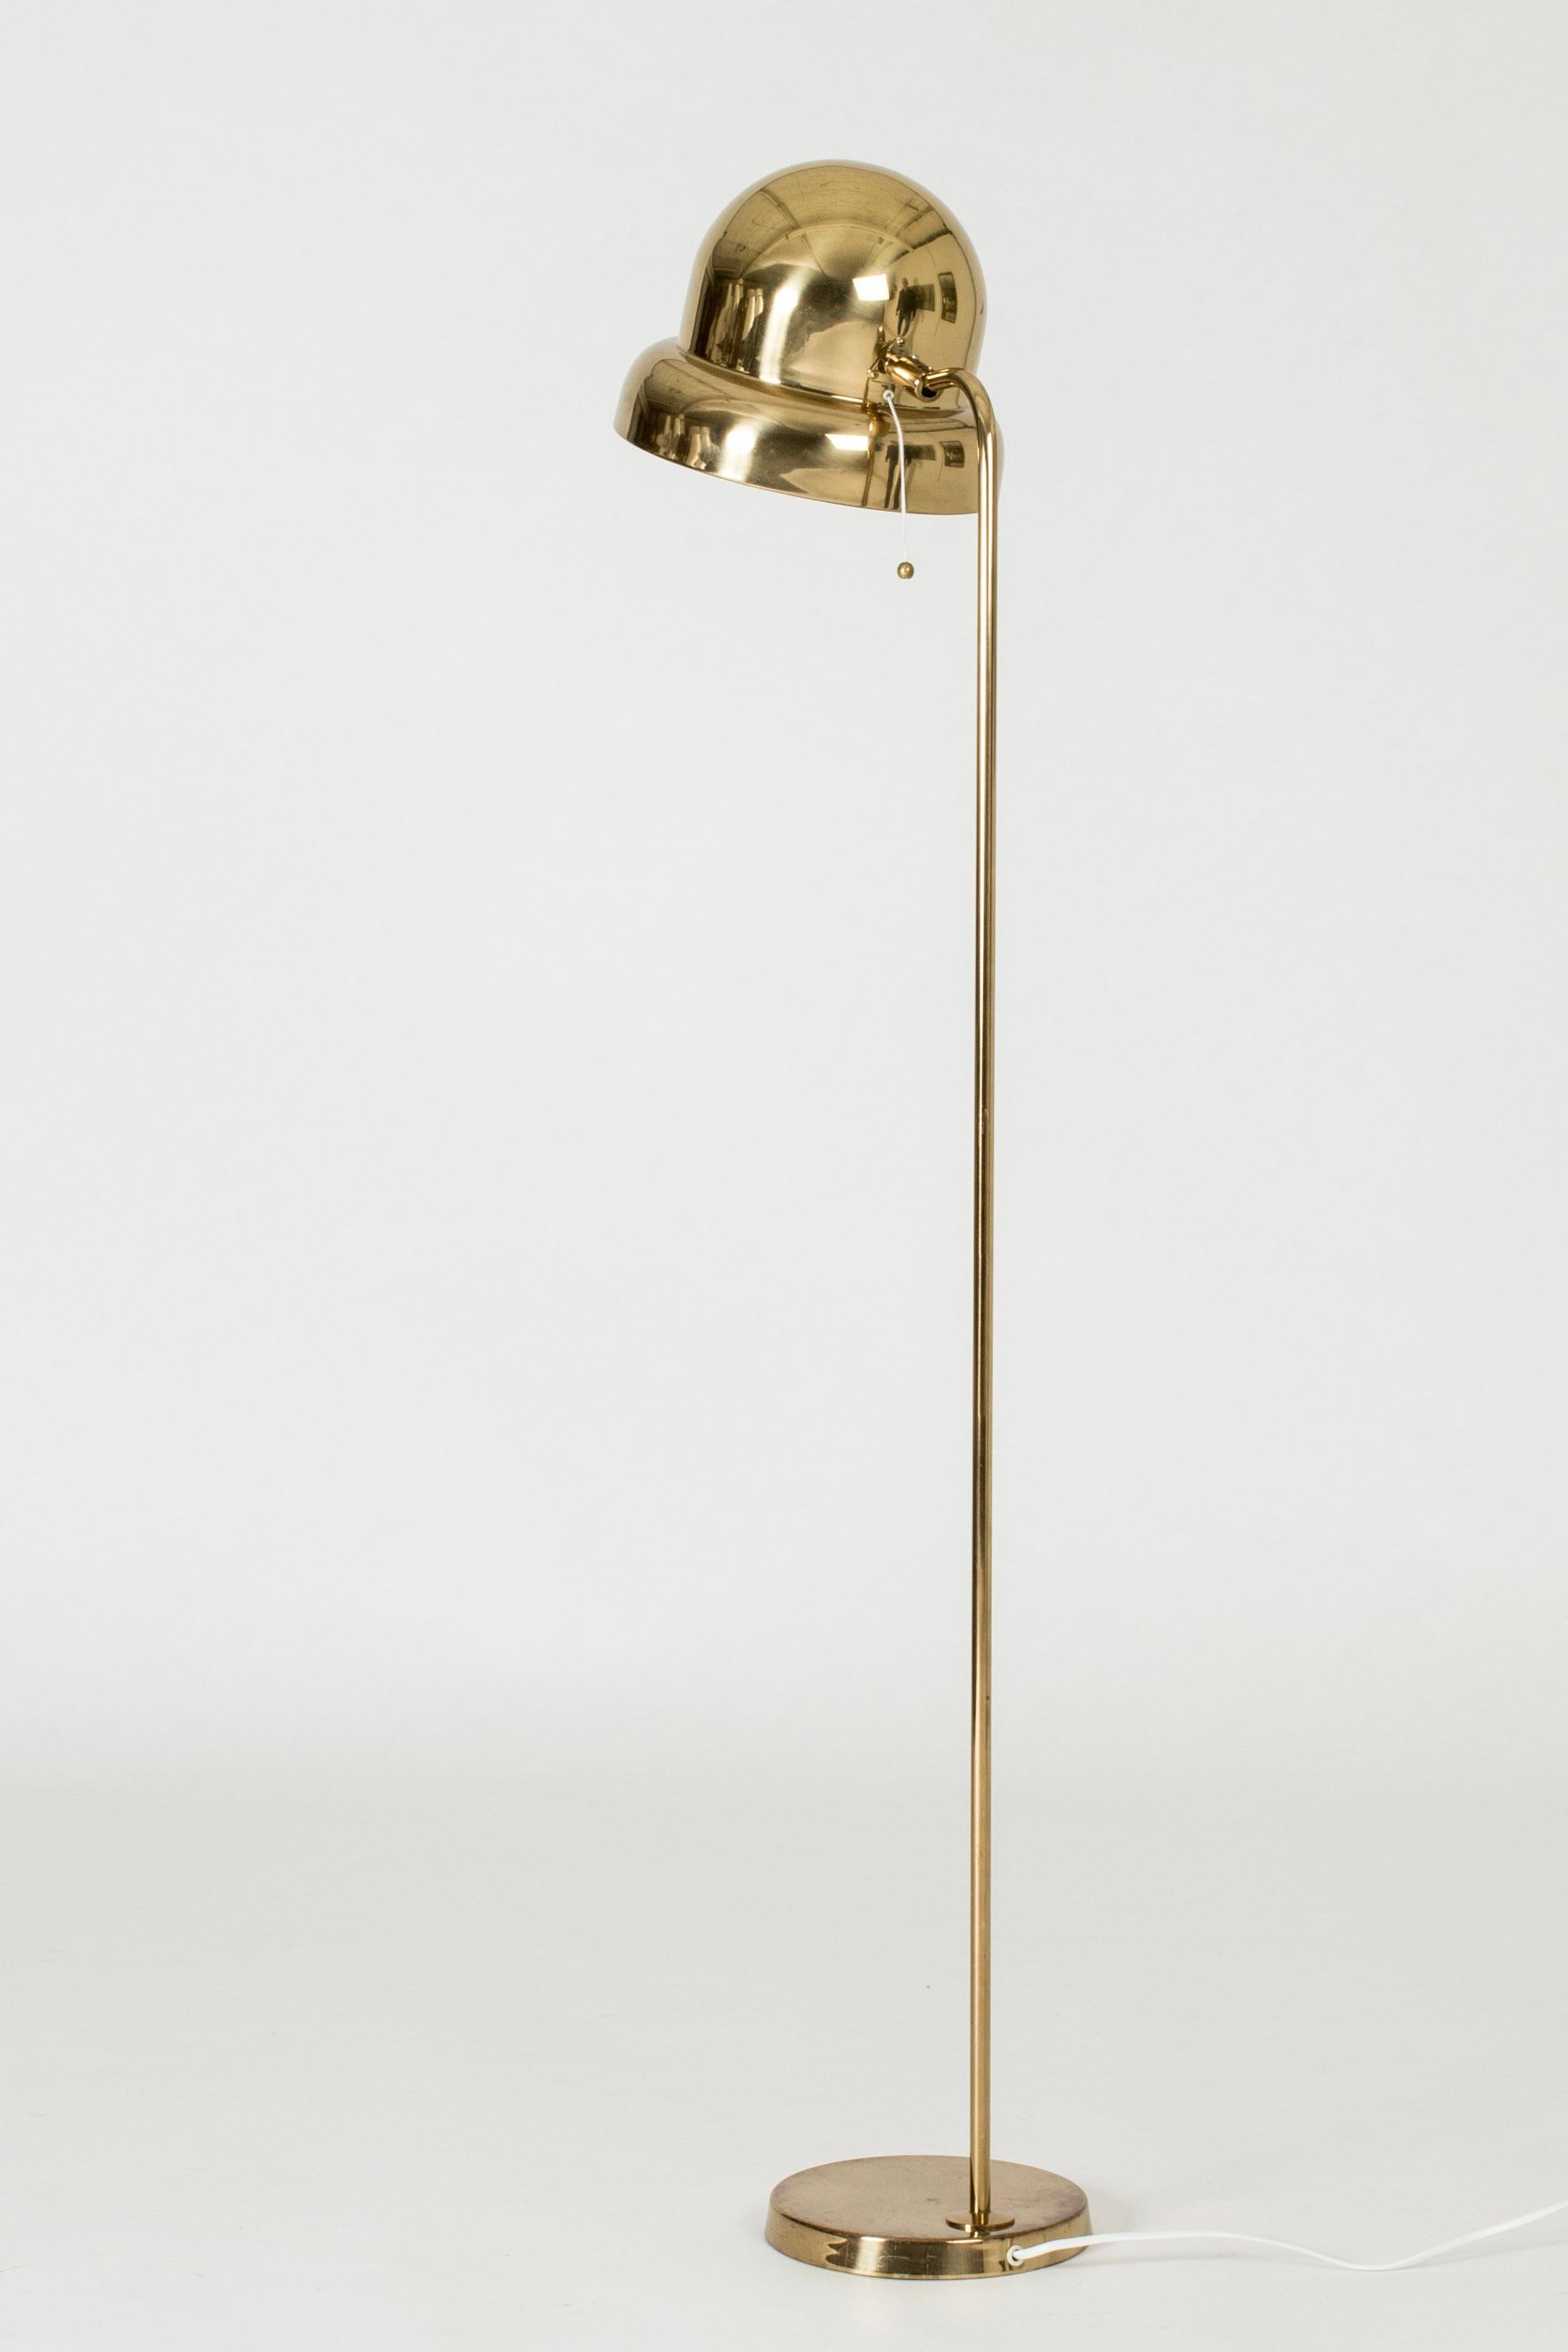 Cool brass floor lamp from Bergboms, with a lampshade in a rounded, organic form. White lacquered inside.